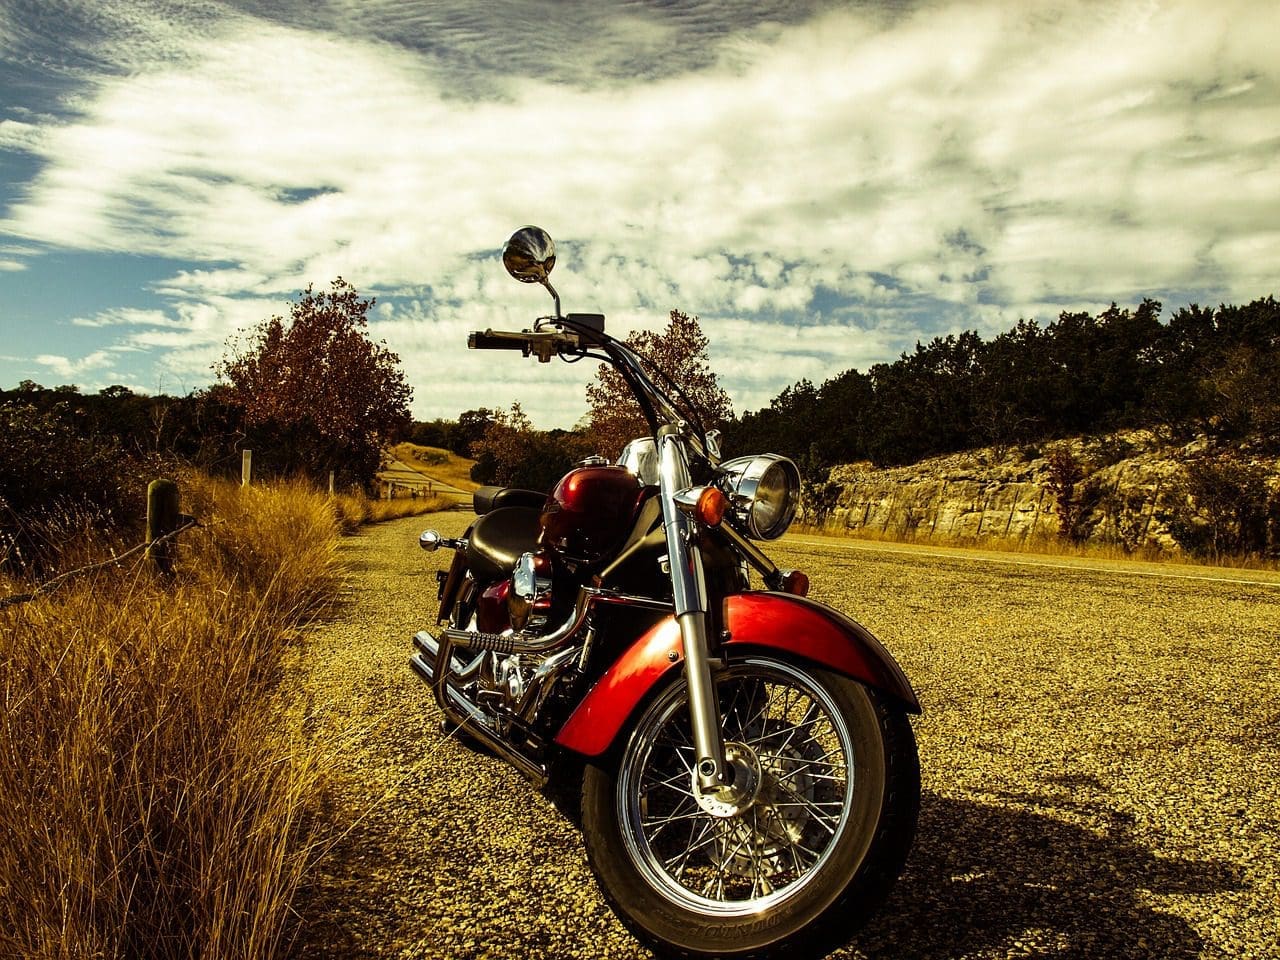 Motorcycle Riding 101: A Safe Travel Guide